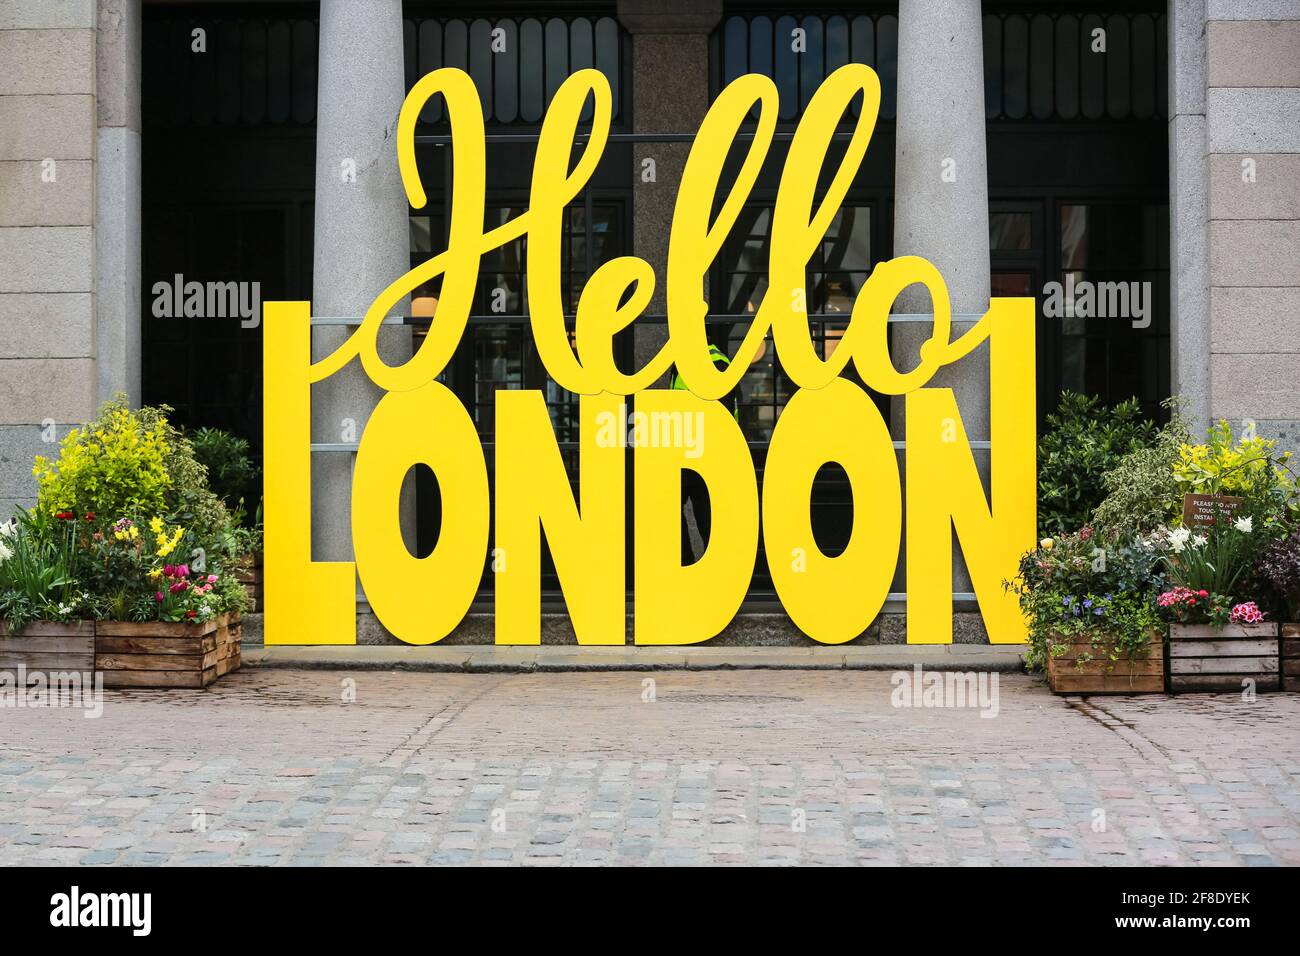 London, UK. 13 April 2021. A yellow Hello London sign welcomes people to Covent Garden. Credit: Waldemar Sikora Stock Photo